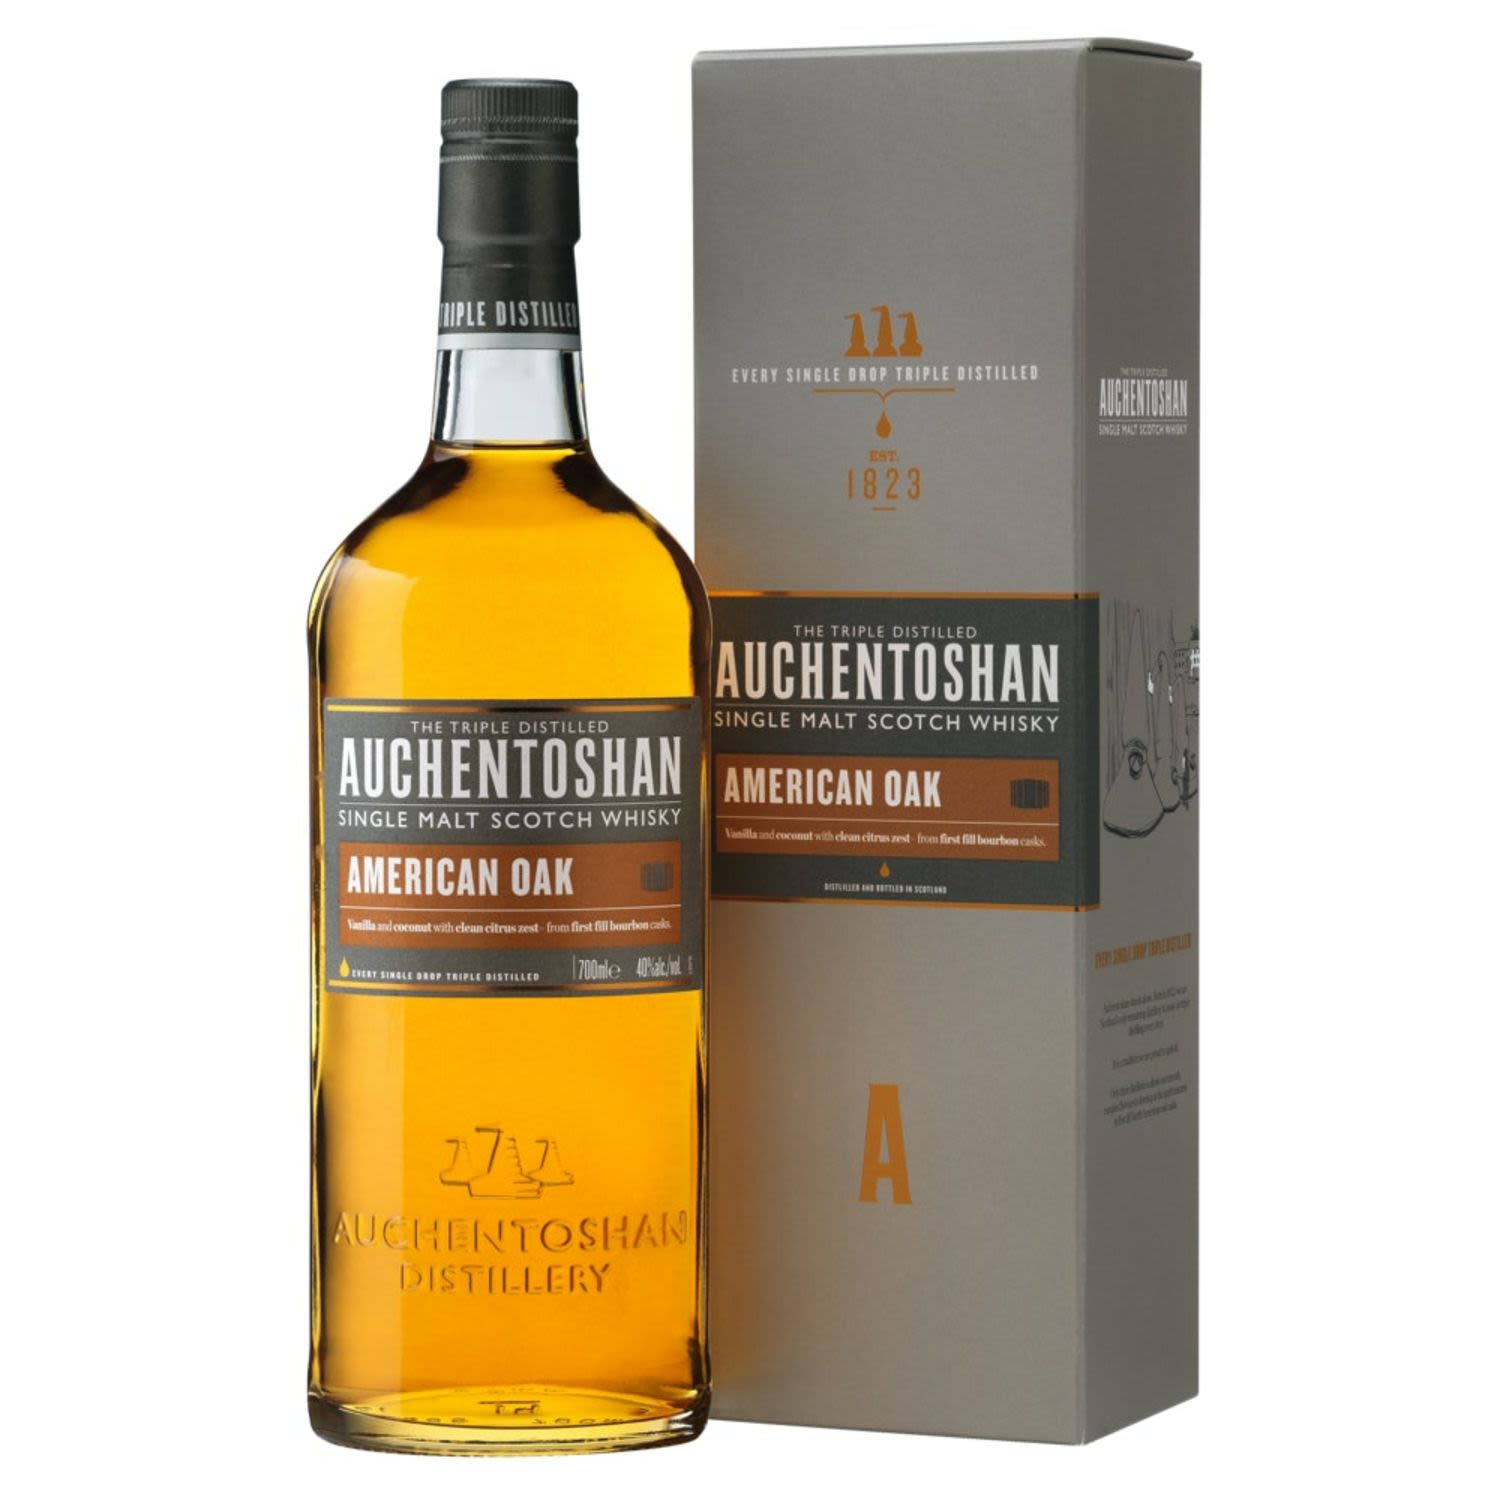 Triple distilled and matured solely in American bourbon casks. The result: a Lowland Single Malt Whisky with the sweet aromas of vanilla and coconut - along with the signature smooth, delicate, Auchentoshan taste.<br /> <br />Alcohol Volume: 40.00%<br /><br />Pack Format: Bottle<br /><br />Standard Drinks: 22.1</br /><br />Pack Type: Bottle<br /><br />Country of Origin: Scotland<br />